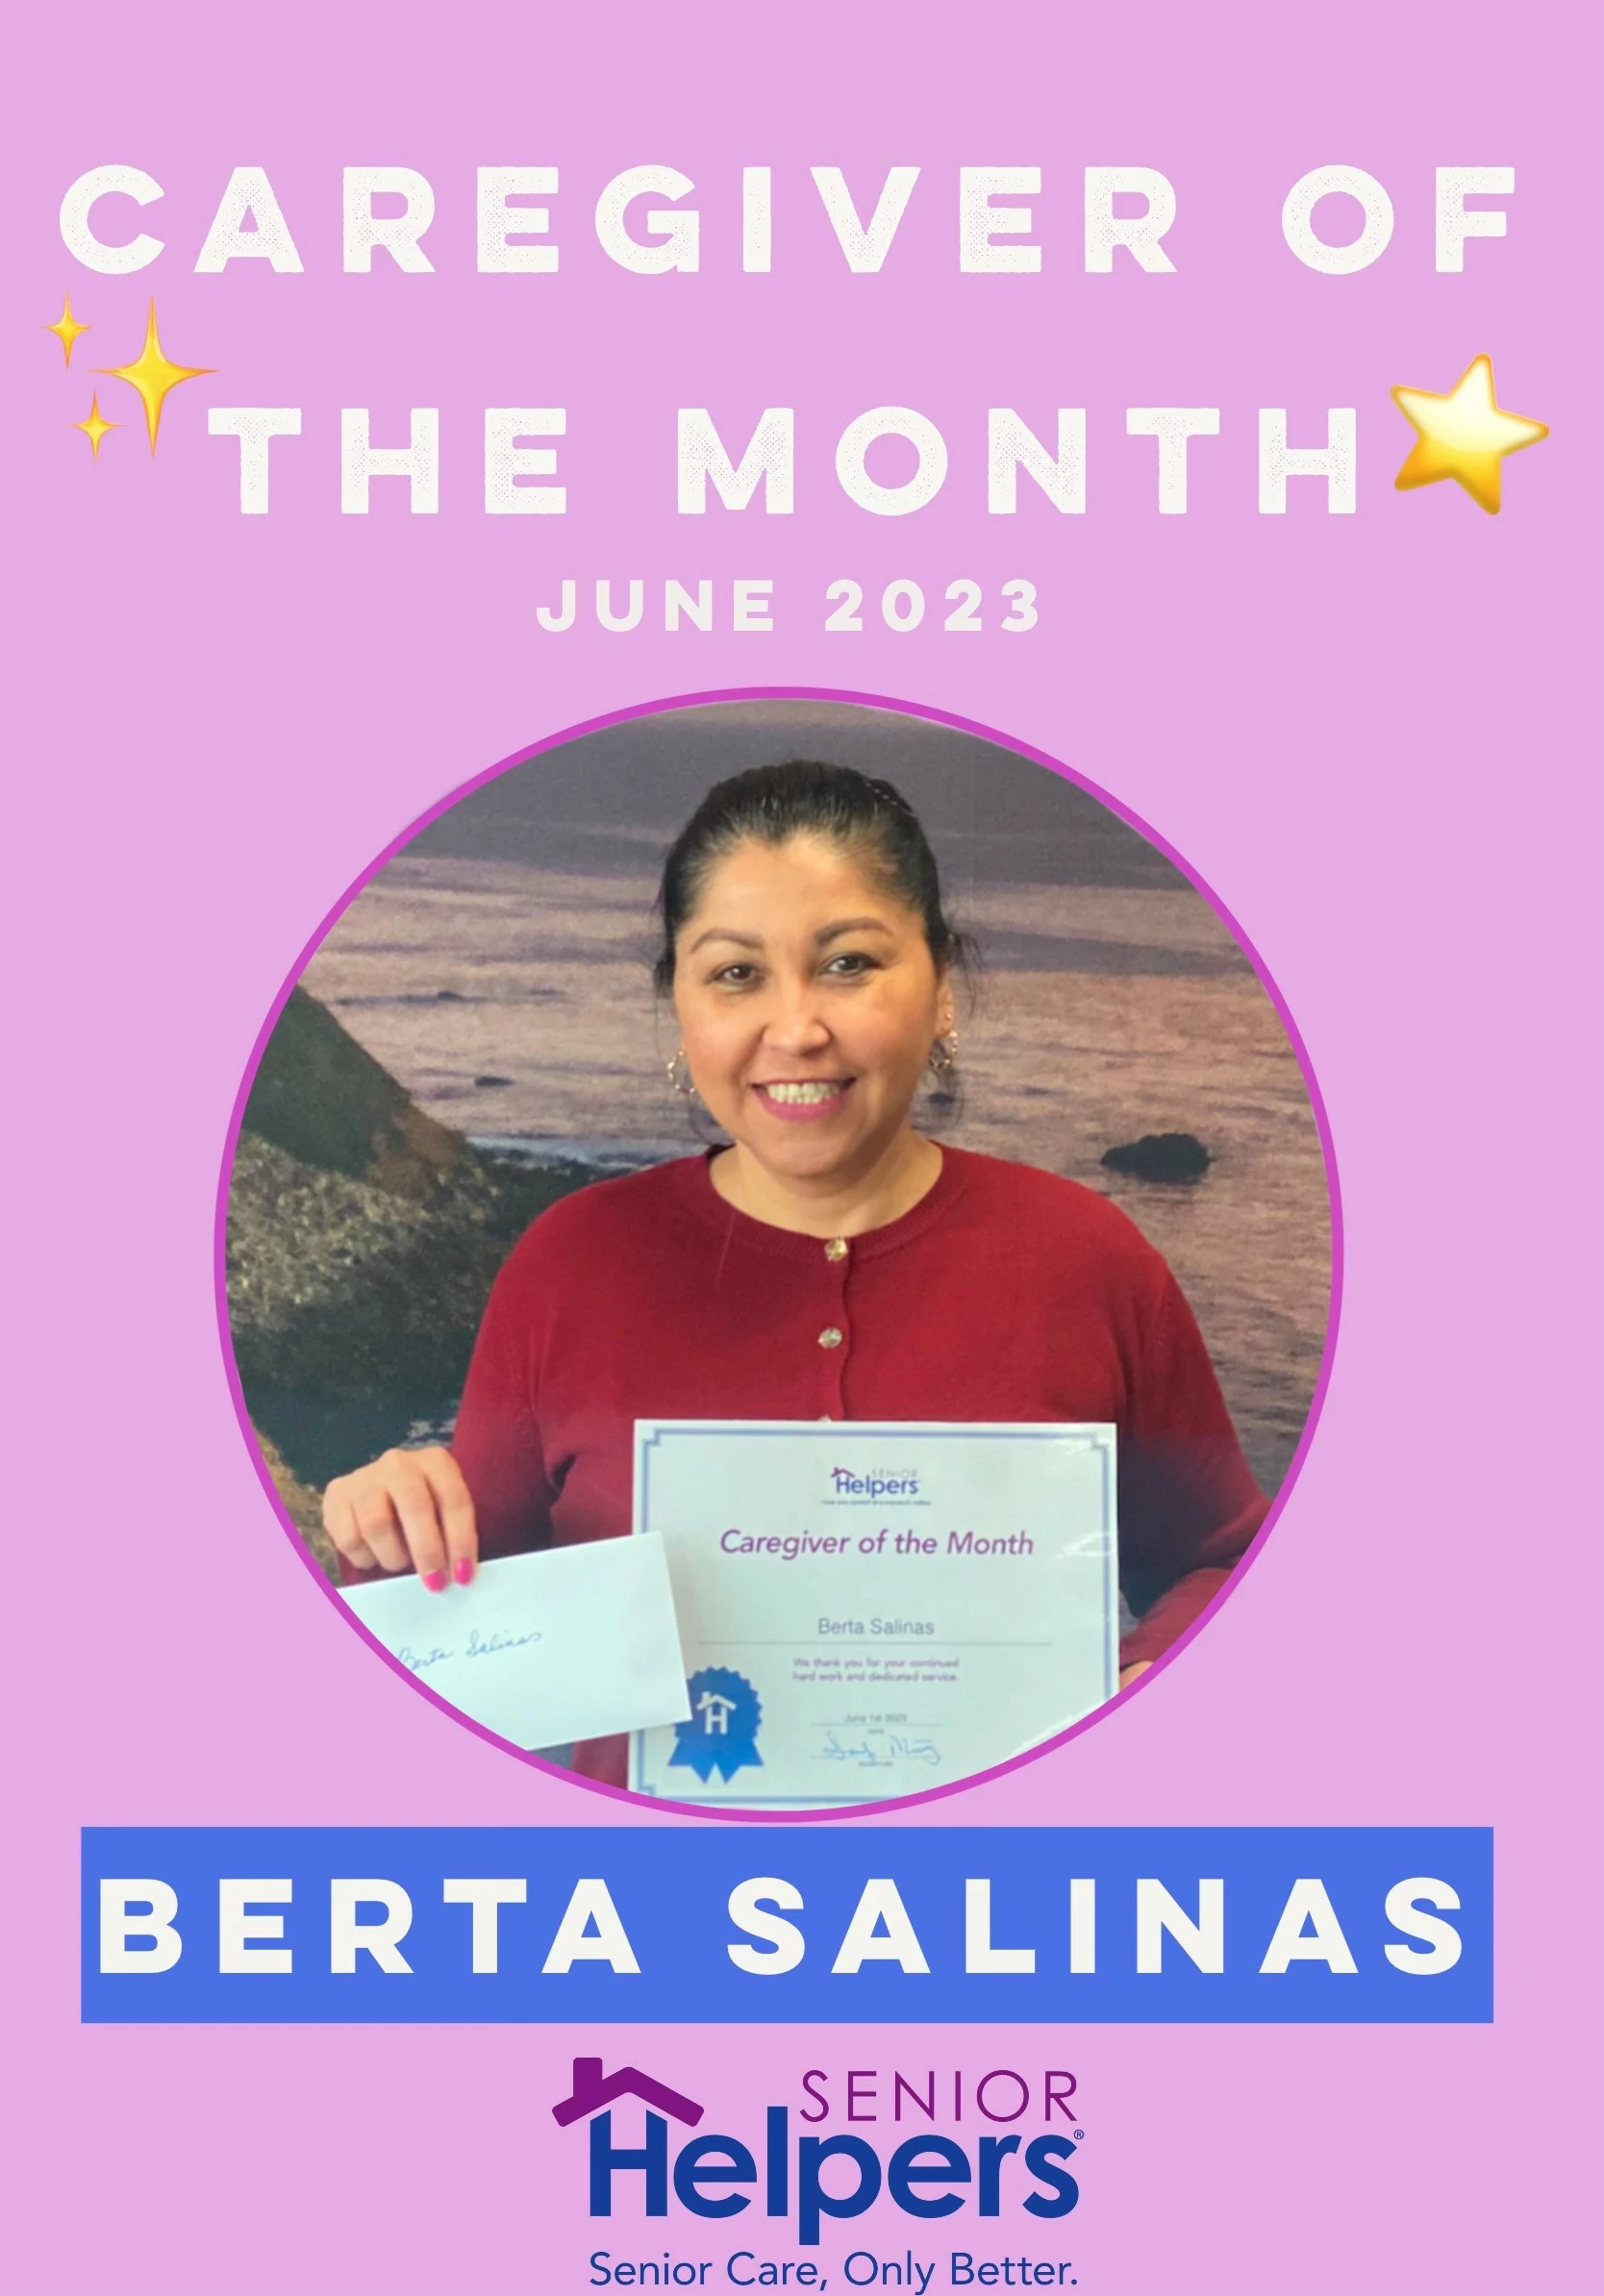 In June, we recognize Berta as Caregiver of the Month. Only with us a few months, but easily has risen to Rock Star status. She’s an experienced caregiver and is highly skilled in all facets of companion, personal, and Dementia/Alzheimer’s care. She is gracious, humble, and always puts her client’s needs first.